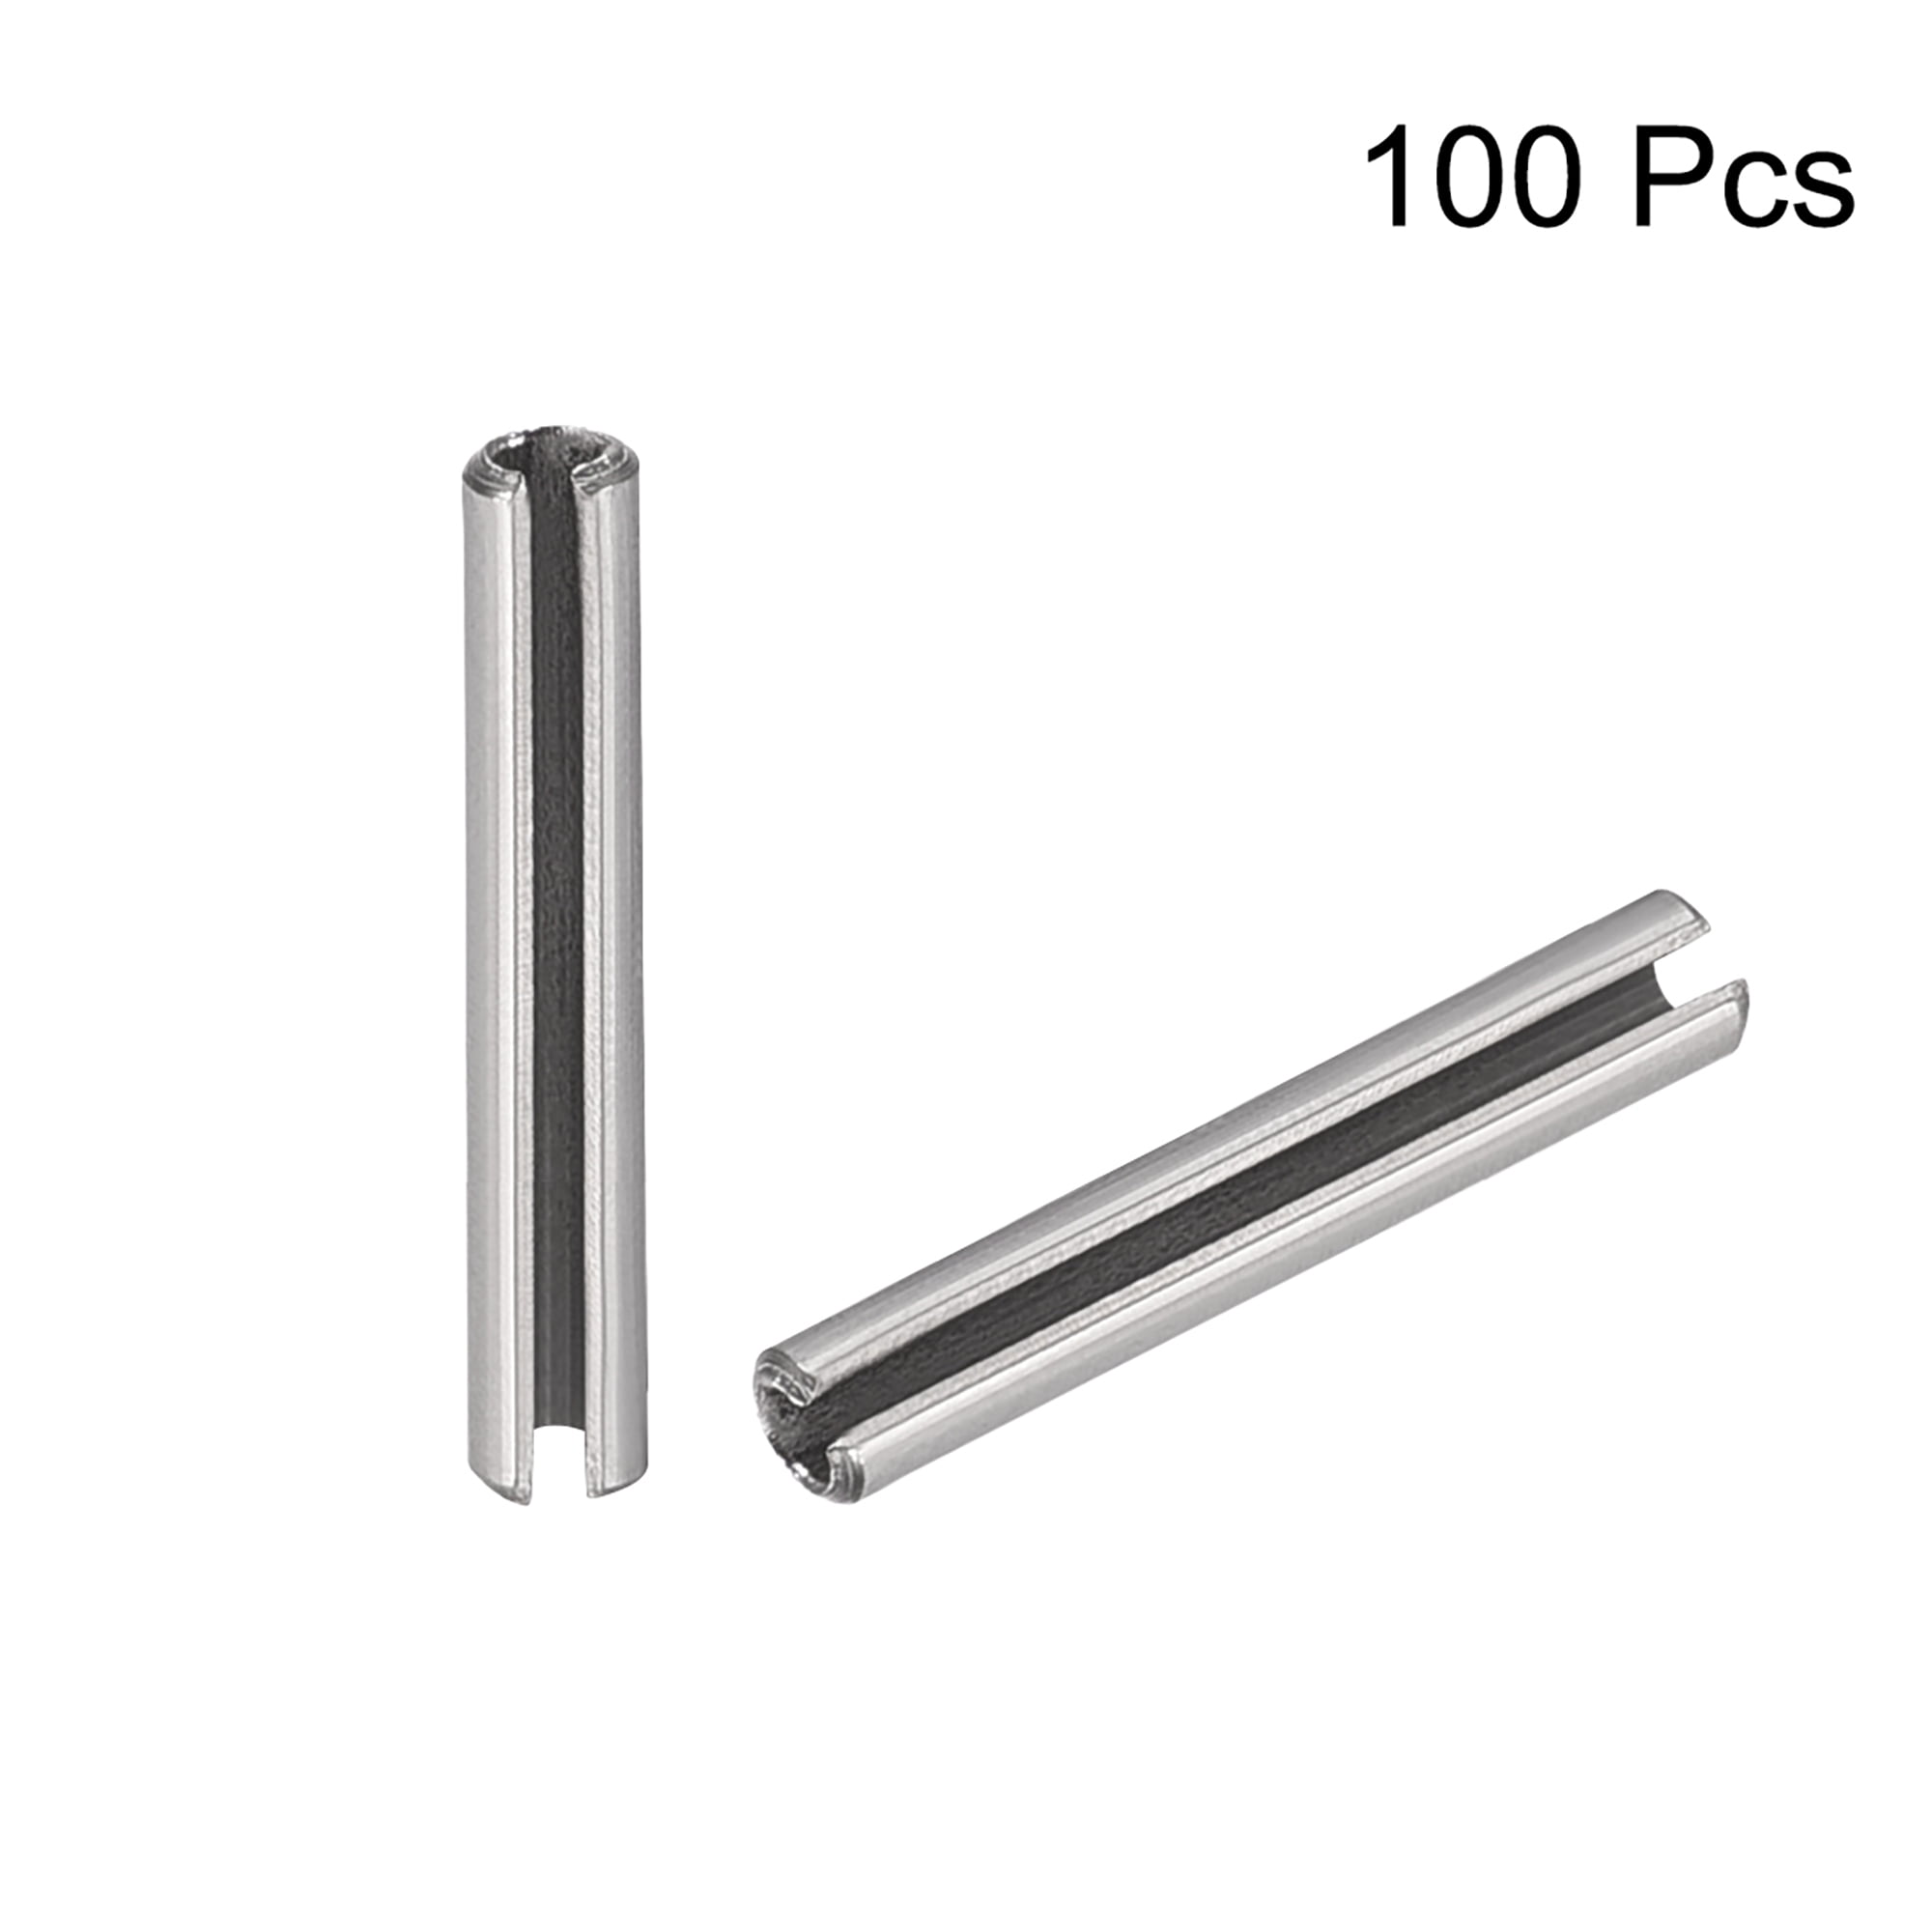 100 pcs 5/32" Dia x 7/8" Length 420 Stainless Steel Slotted Roll Spring Pin 